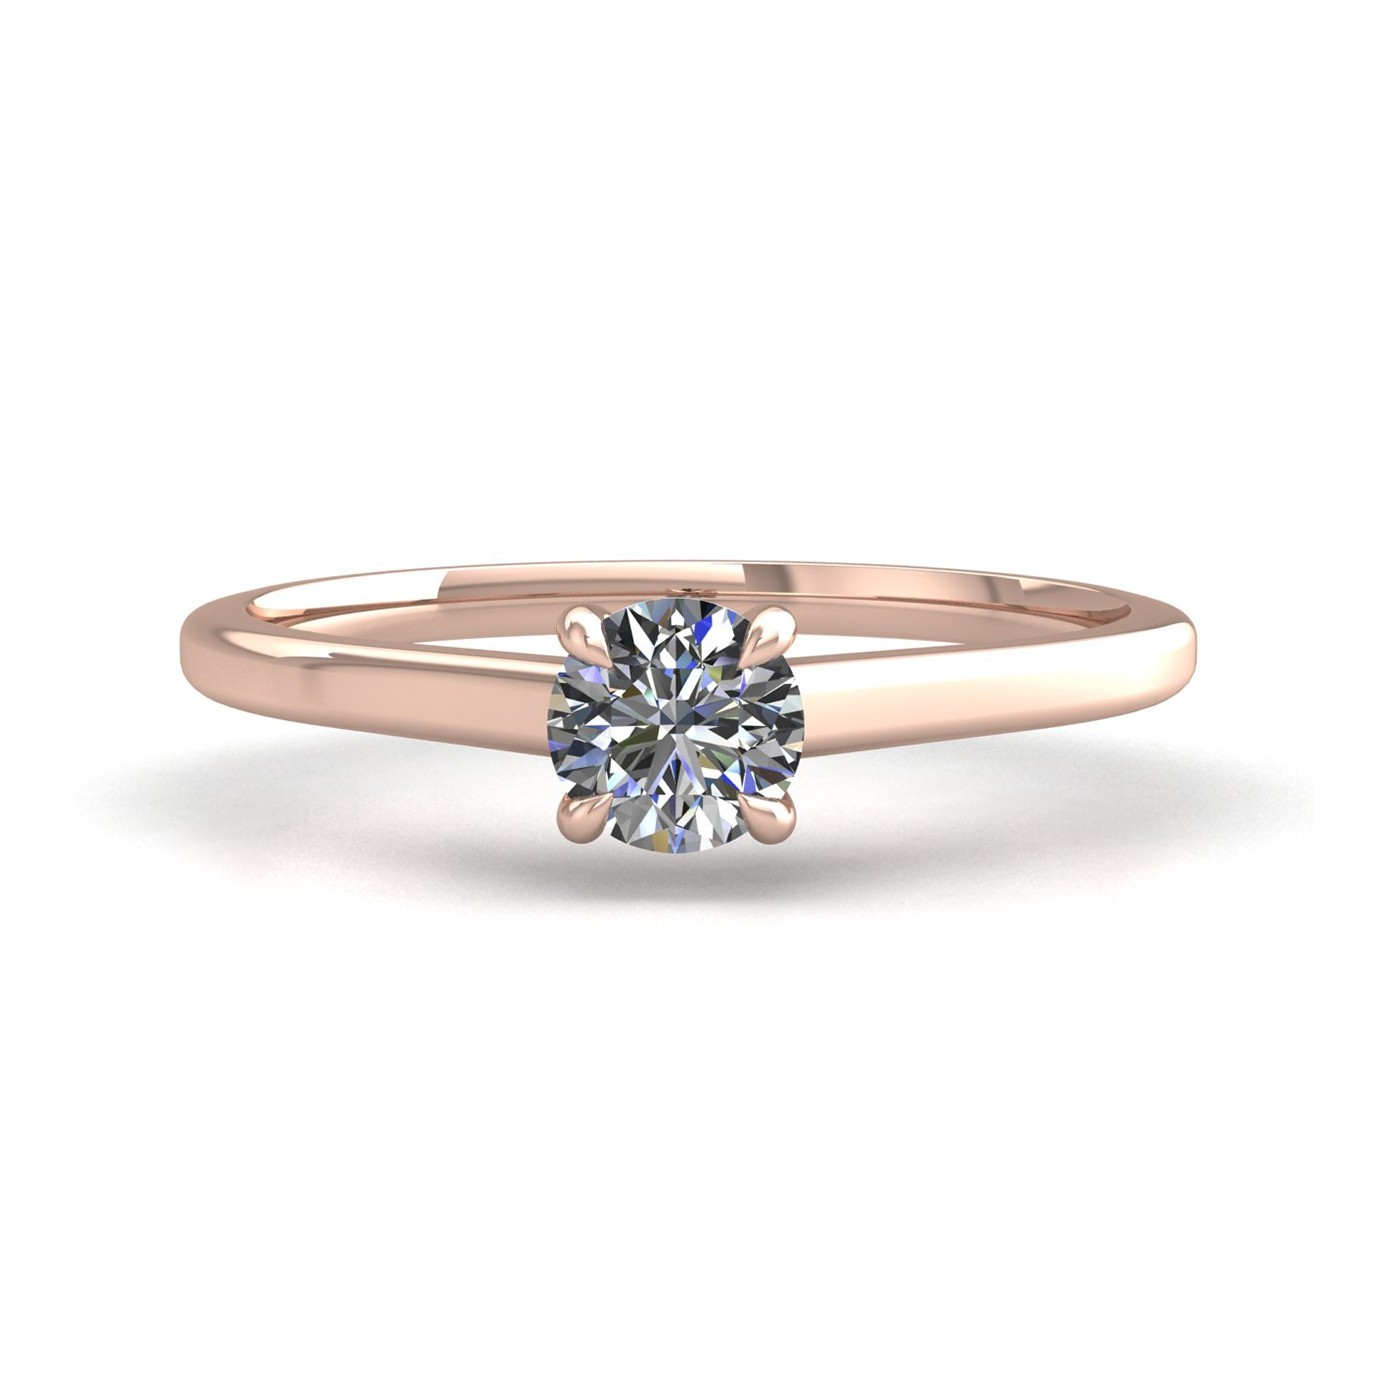 18k rose gold 1.0ct 4 prongs solitaire round cut diamond engagement ring with whisper thin band Photos & images